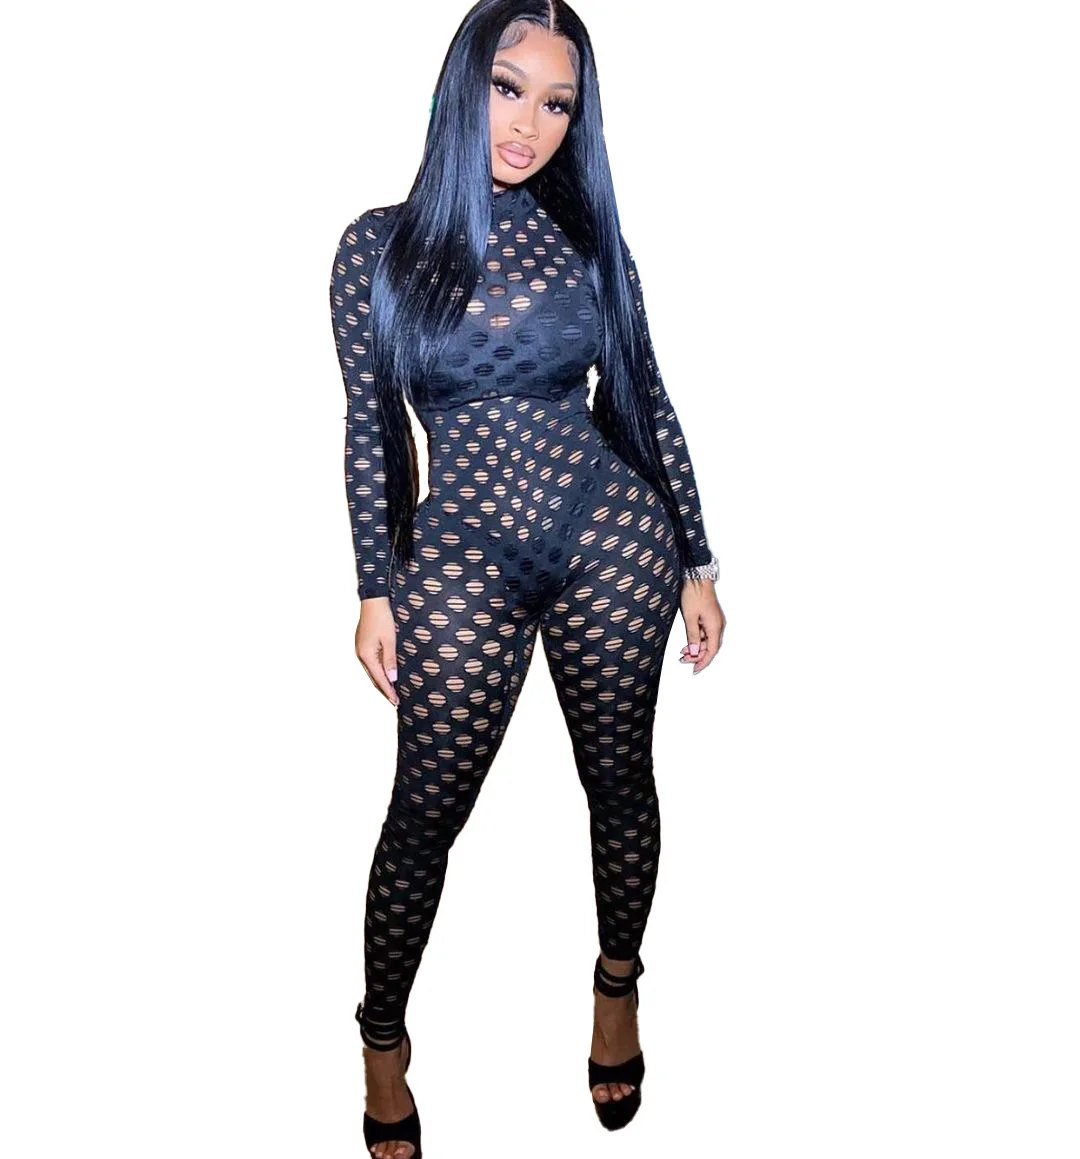 

2021 Women New Arrivals Sexy Summer Long Sleeve Fishnet Hole Bodycon Clubwear One Piece Jumpsuits for Women Wholesale OEM ODM